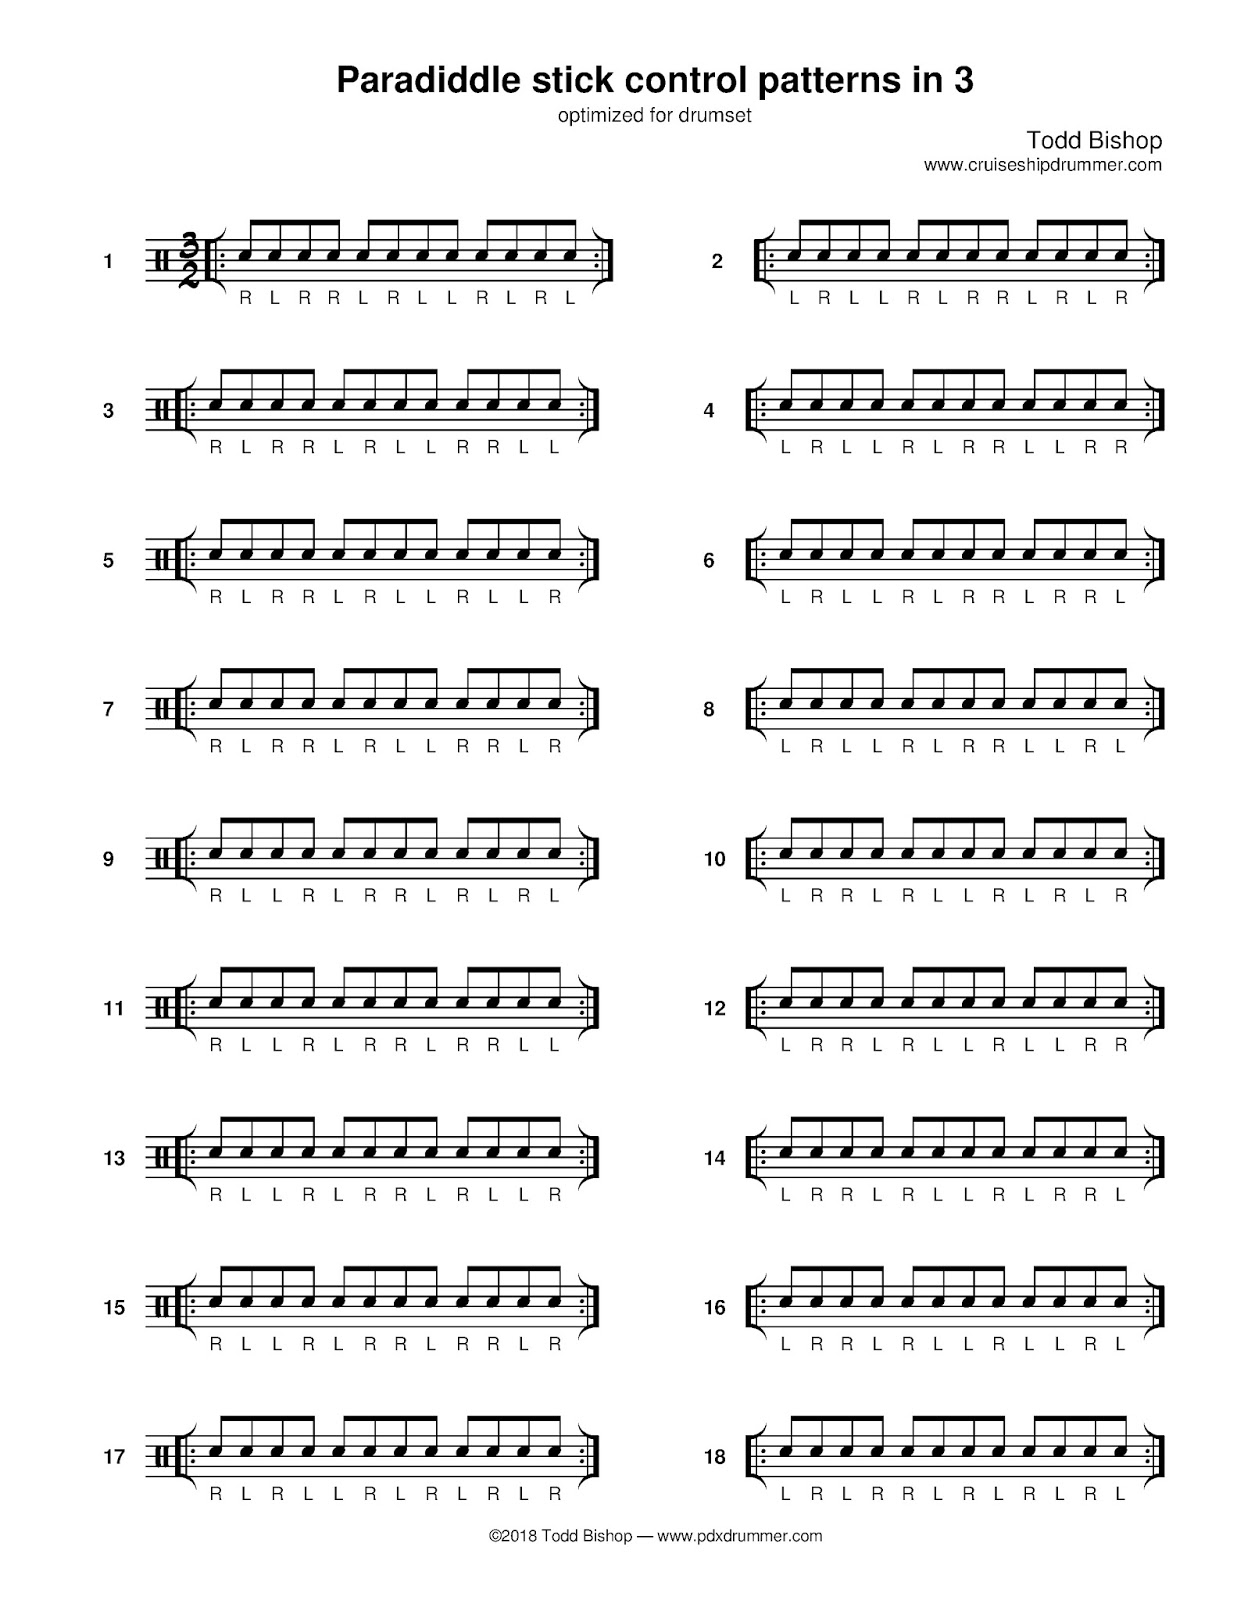 Cruise Ship Drummer!: Paradiddle stick control patterns in 3